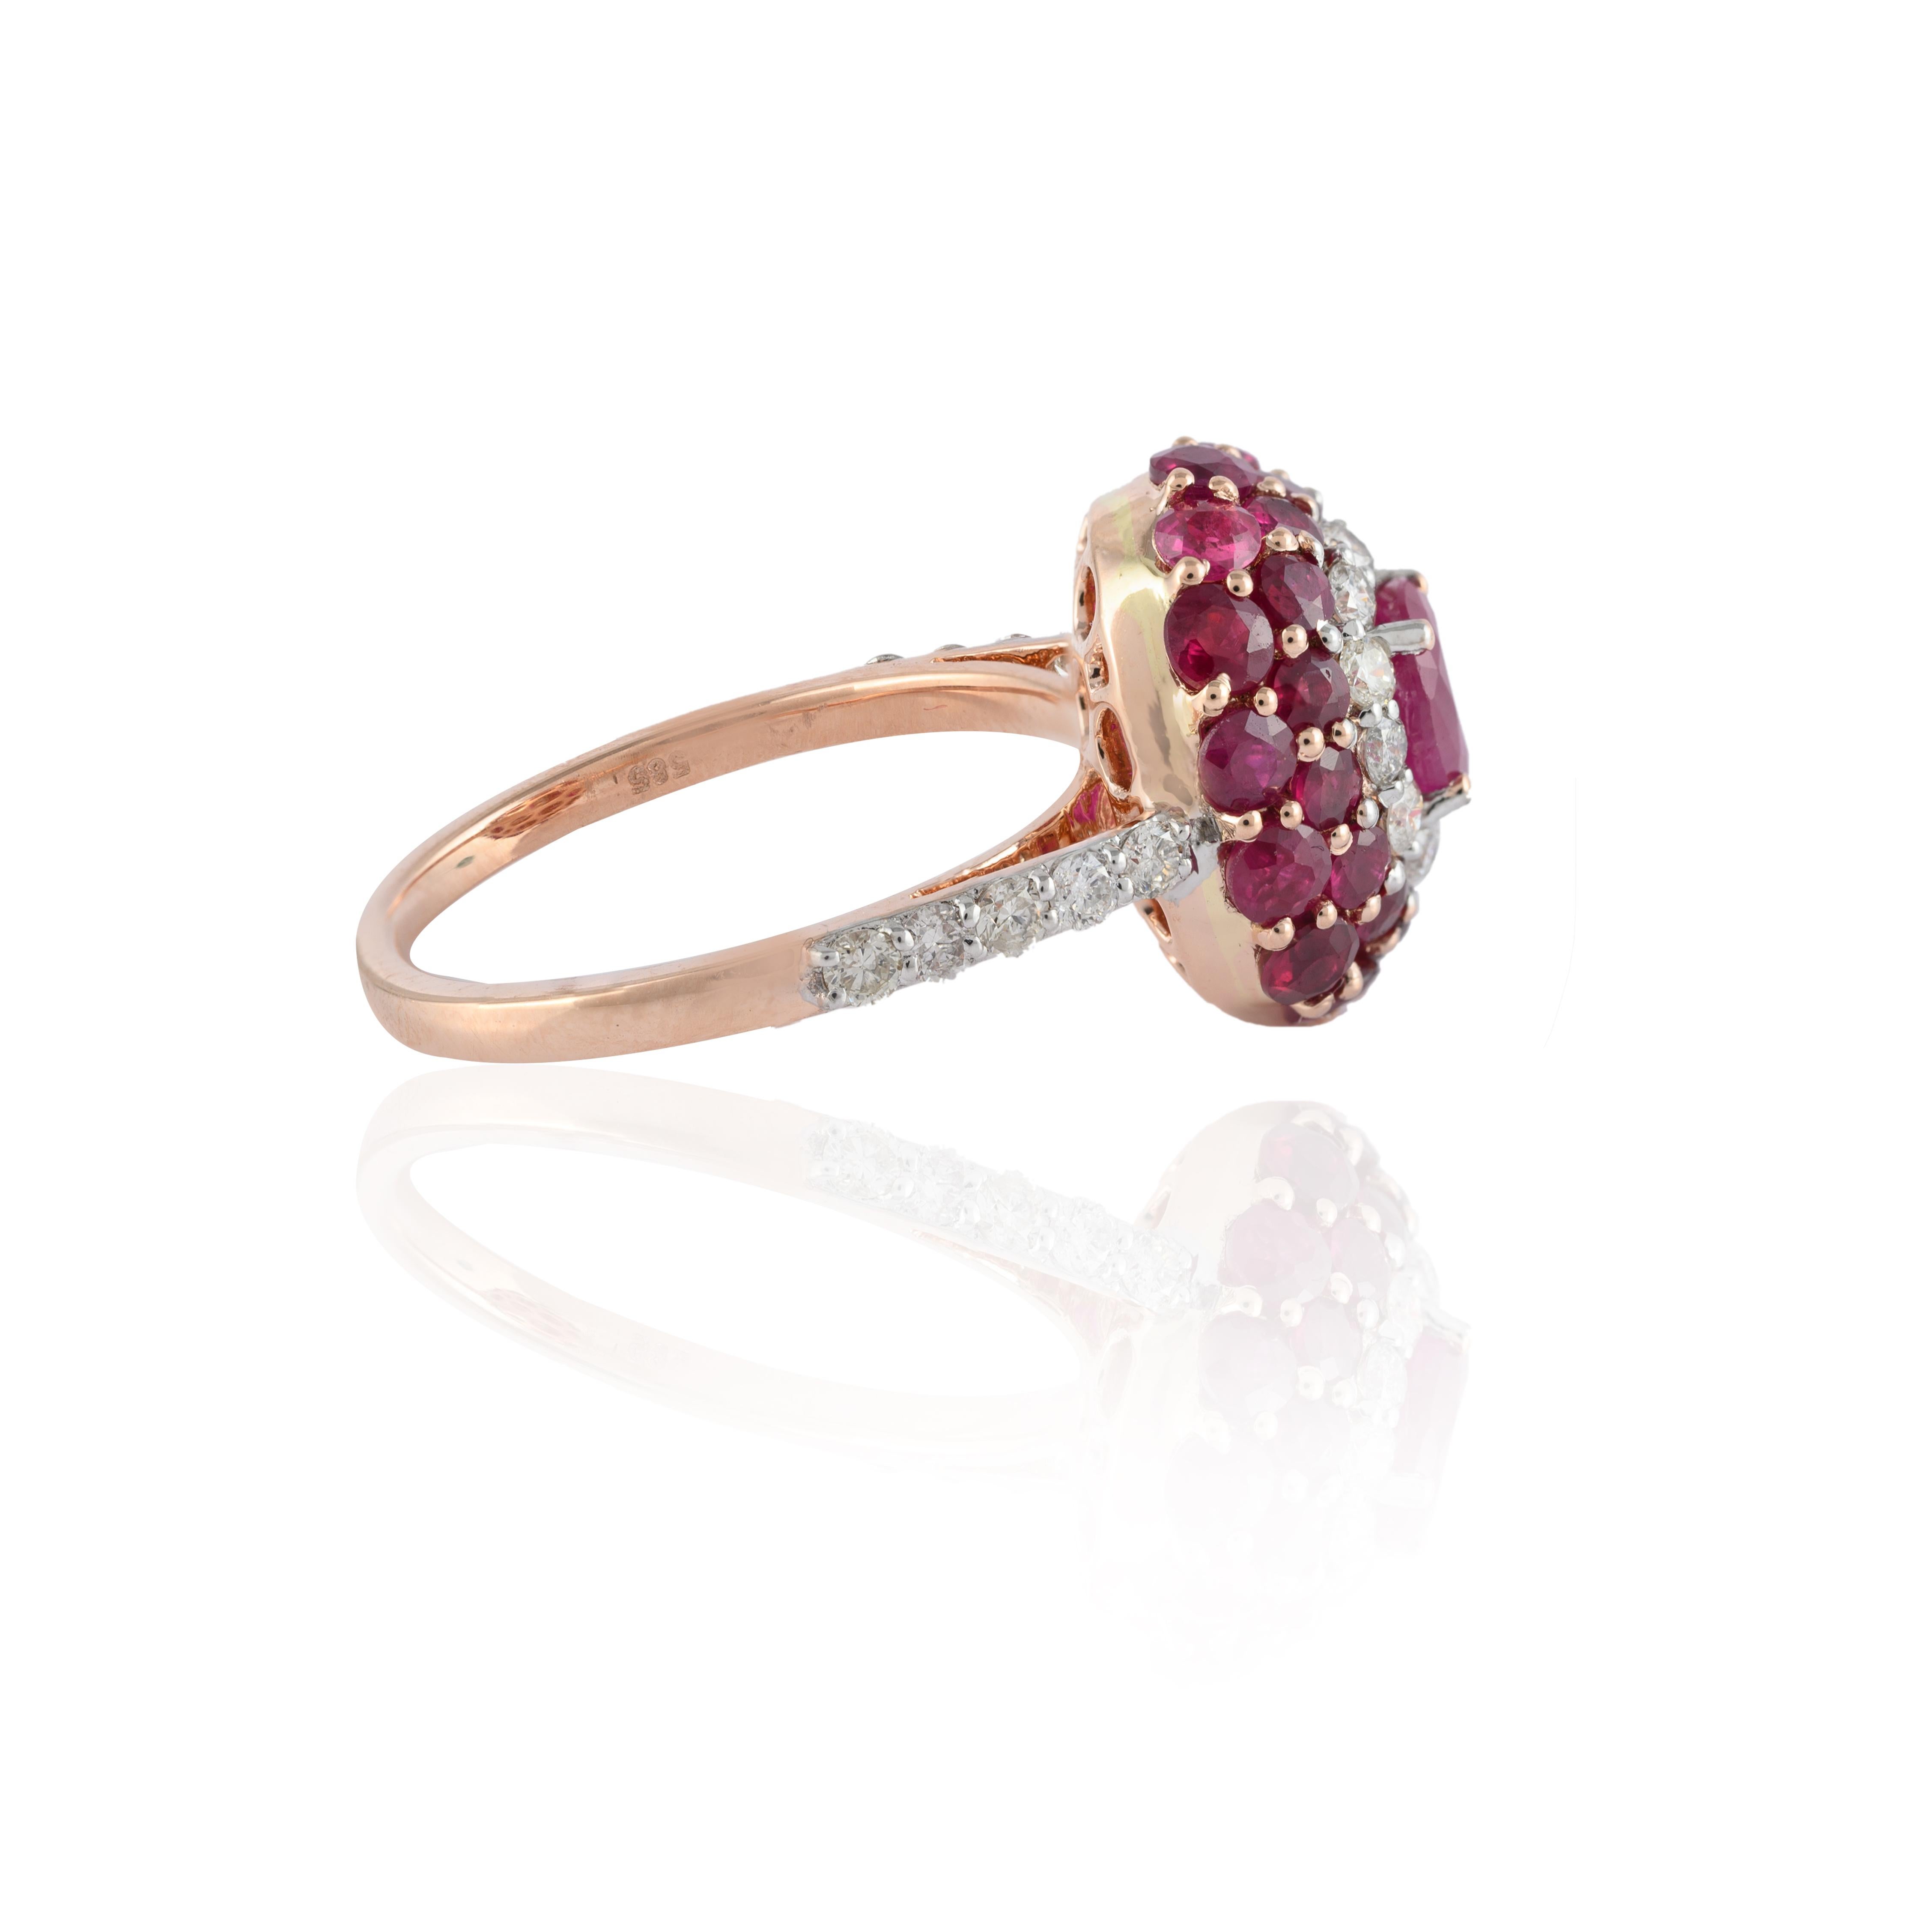 For Sale:  2.76 Carat Natural Ruby Cluster Ring in 14k Solid Rose Gold with Diamonds 3